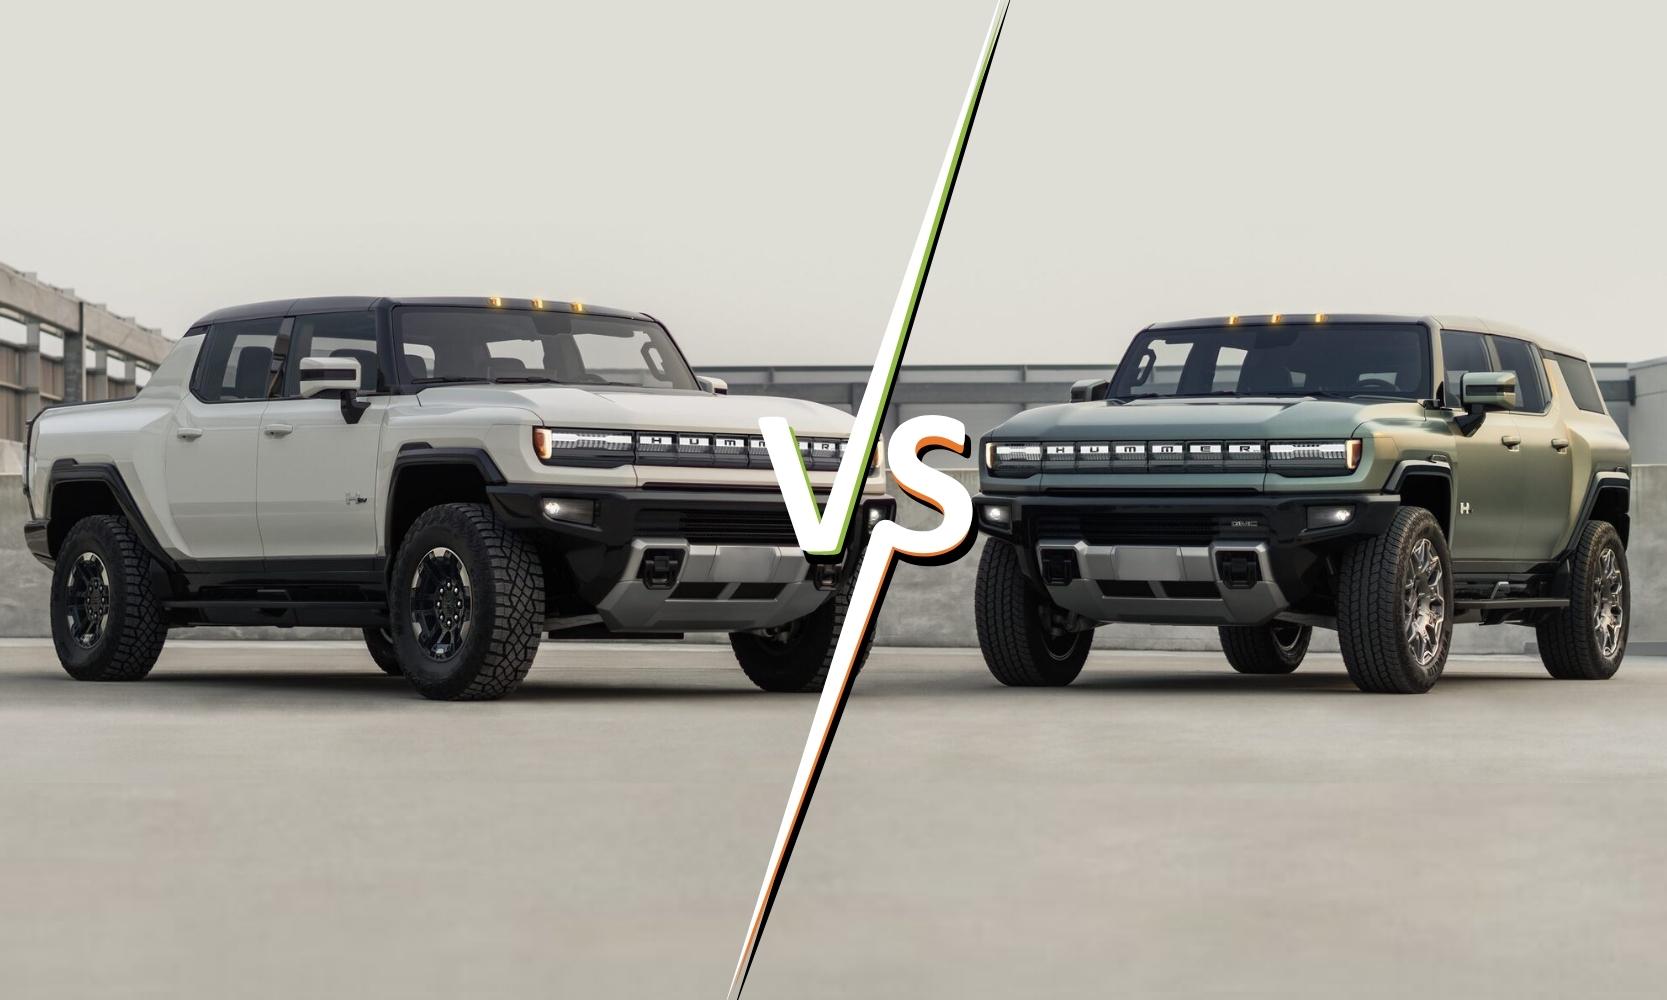 Side by side comparison of a green 2024 GMC Hummer SUV on the right and a white 2022 GMC Hummer pickup truck on the left